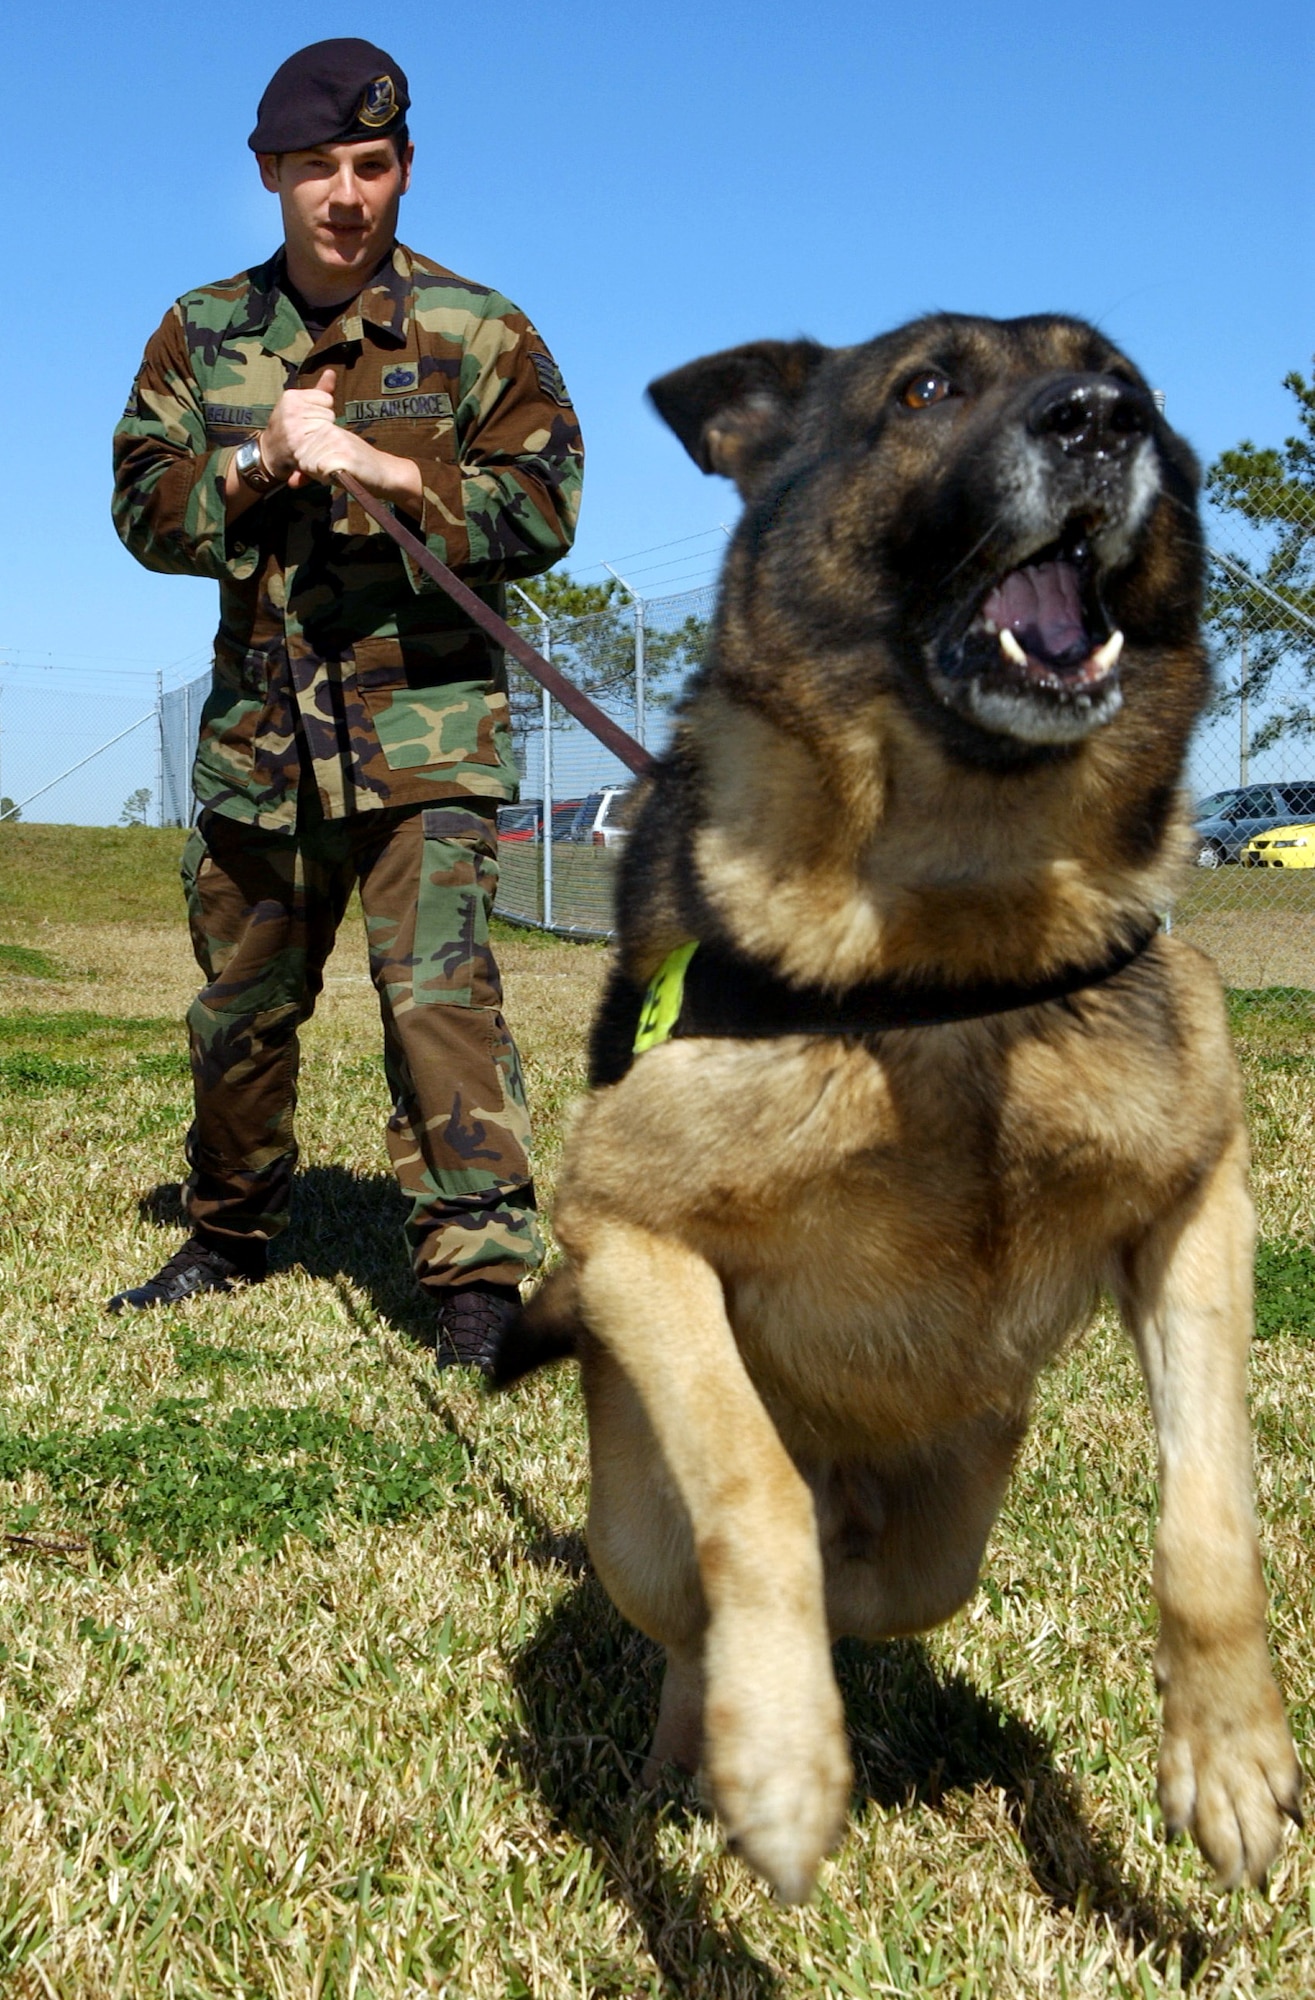 MACDILL AIR FORCE BASE, Fla. -- Staff Sgt. Timothy Bellus restrains his military working dog, Manzo, here Jan. 31. Manzo is a detection patrol dog. Sergeant Bellus is a military working dog handler with the 6th Security Forces Squadron. (U.S. Air Force photo by Airman 1st Class Bradley A. Lail)